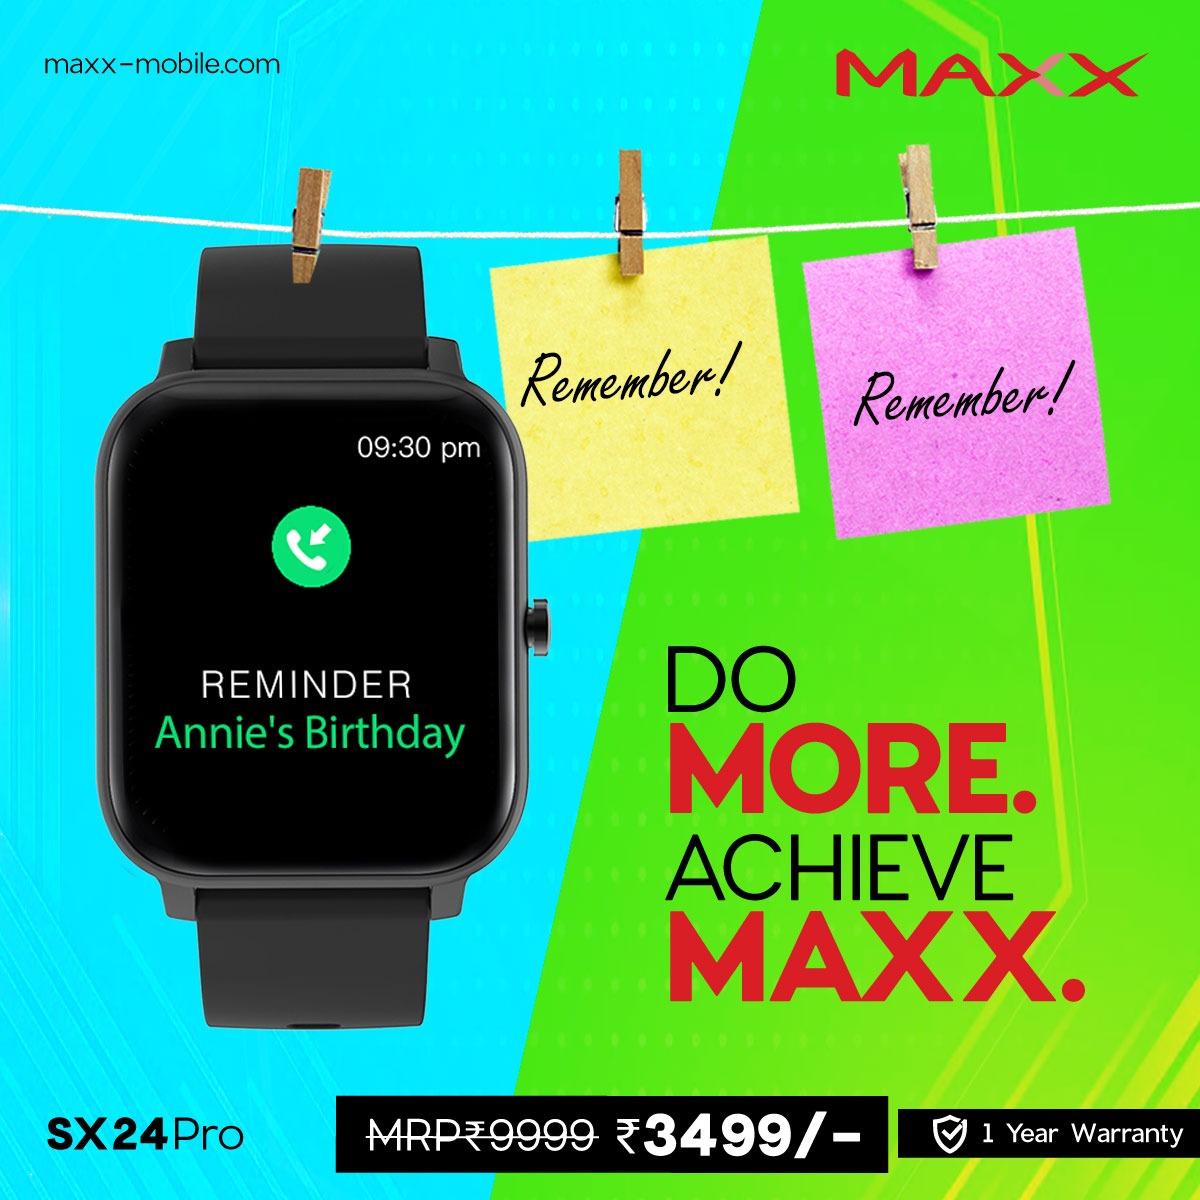 Now with Maxx SX24 PRO remember every detail😍!! 
#smartwatch #smartwatchsleepmonitor #smartwatches #smartwatchalert #smartwatchclassy #smartwatchandroid #smartwatchbluetooth #smartwatchbluetooths